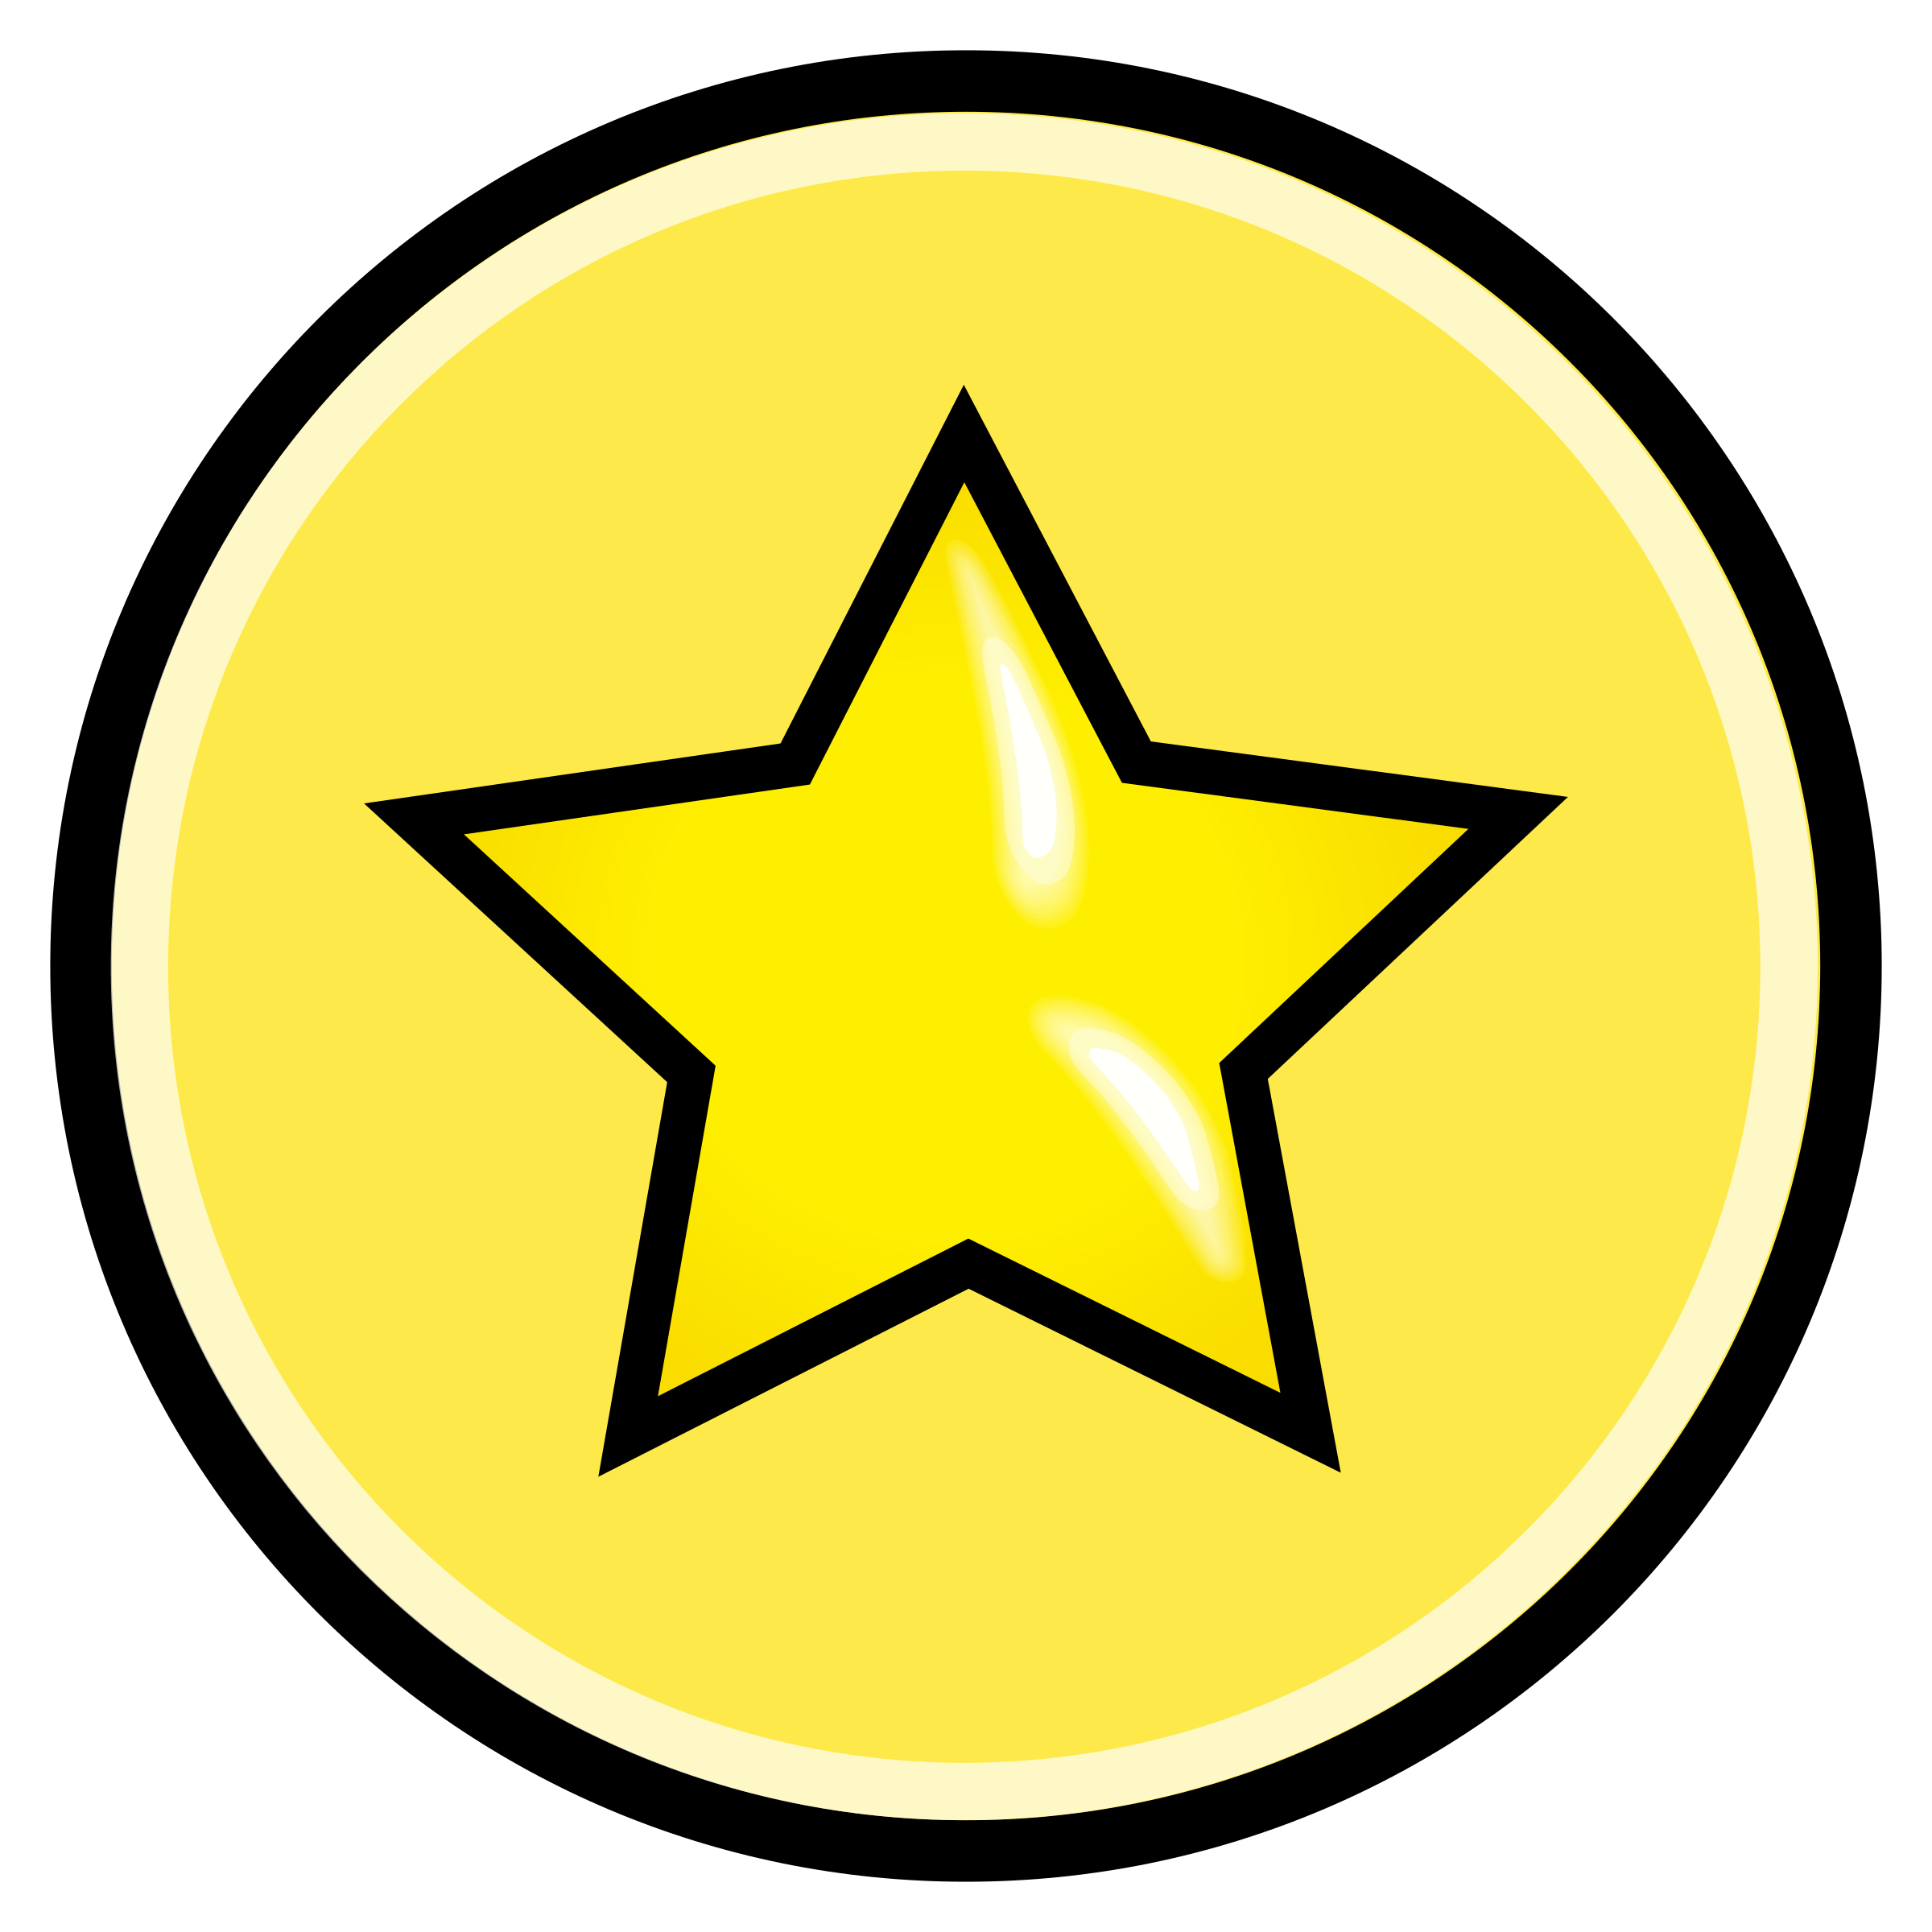 Yellow Star Circle Logo - Button With Yellow Star Vector Clipart image